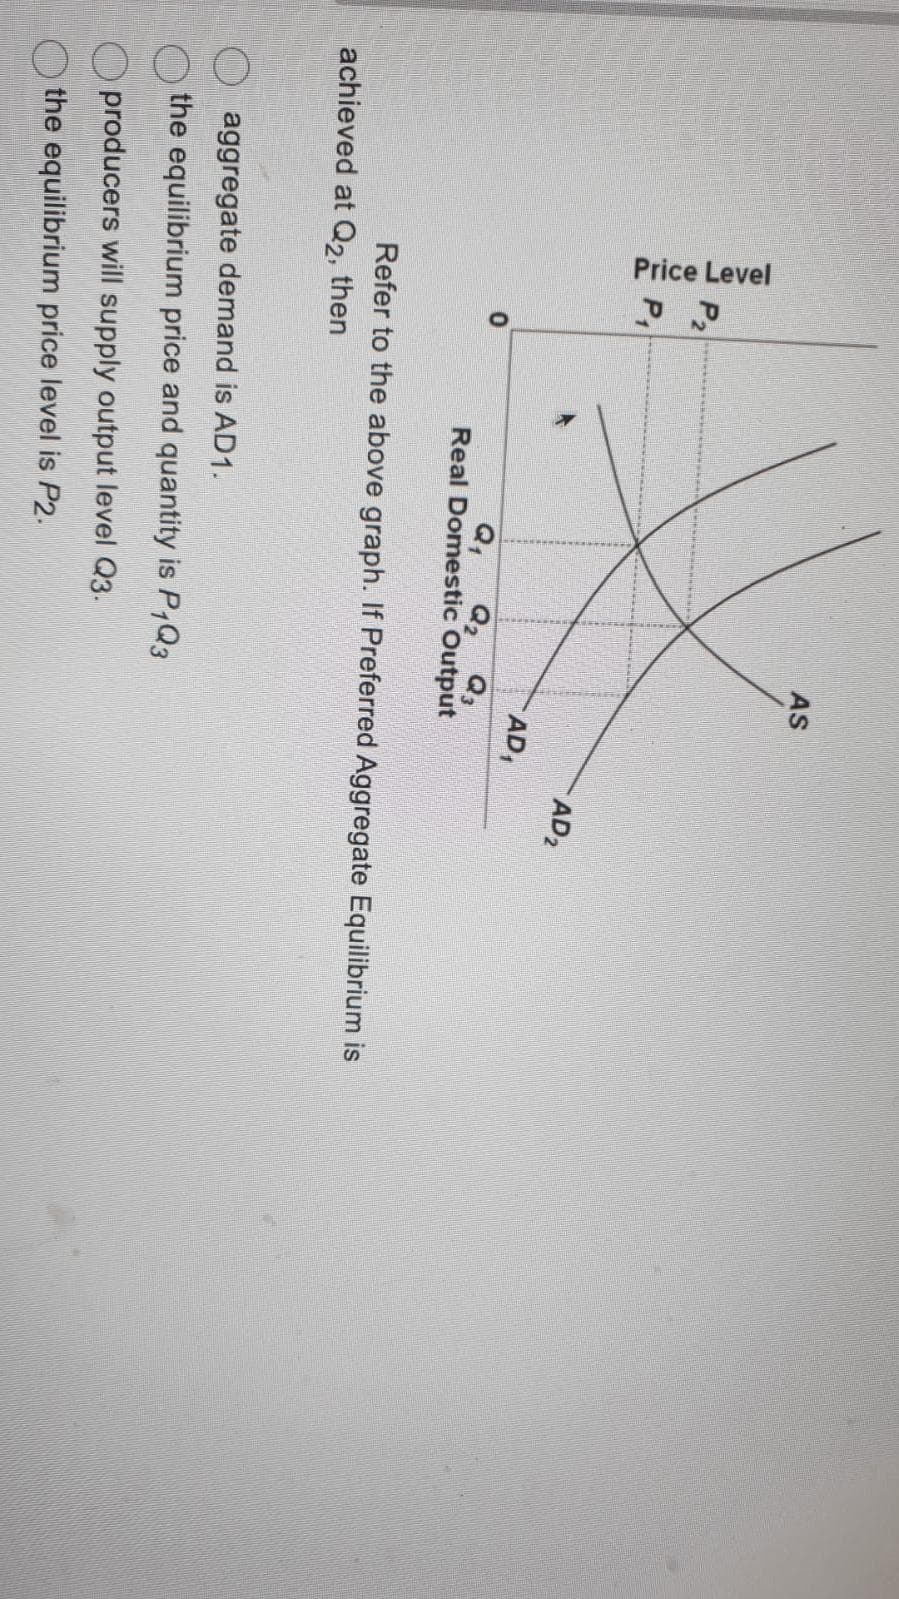 Price Level
0
Q₁
AS
AD2
AD₁
Q2 Q3
Real Domestic Output
Refer to the above graph. If Preferred Aggregate Equilibrium is
achieved at Q2, then
aggregate demand is AD1.
the equilibrium price and quantity is P1Q3
producers will supply output level Q3.
the equilibrium price level is P2.